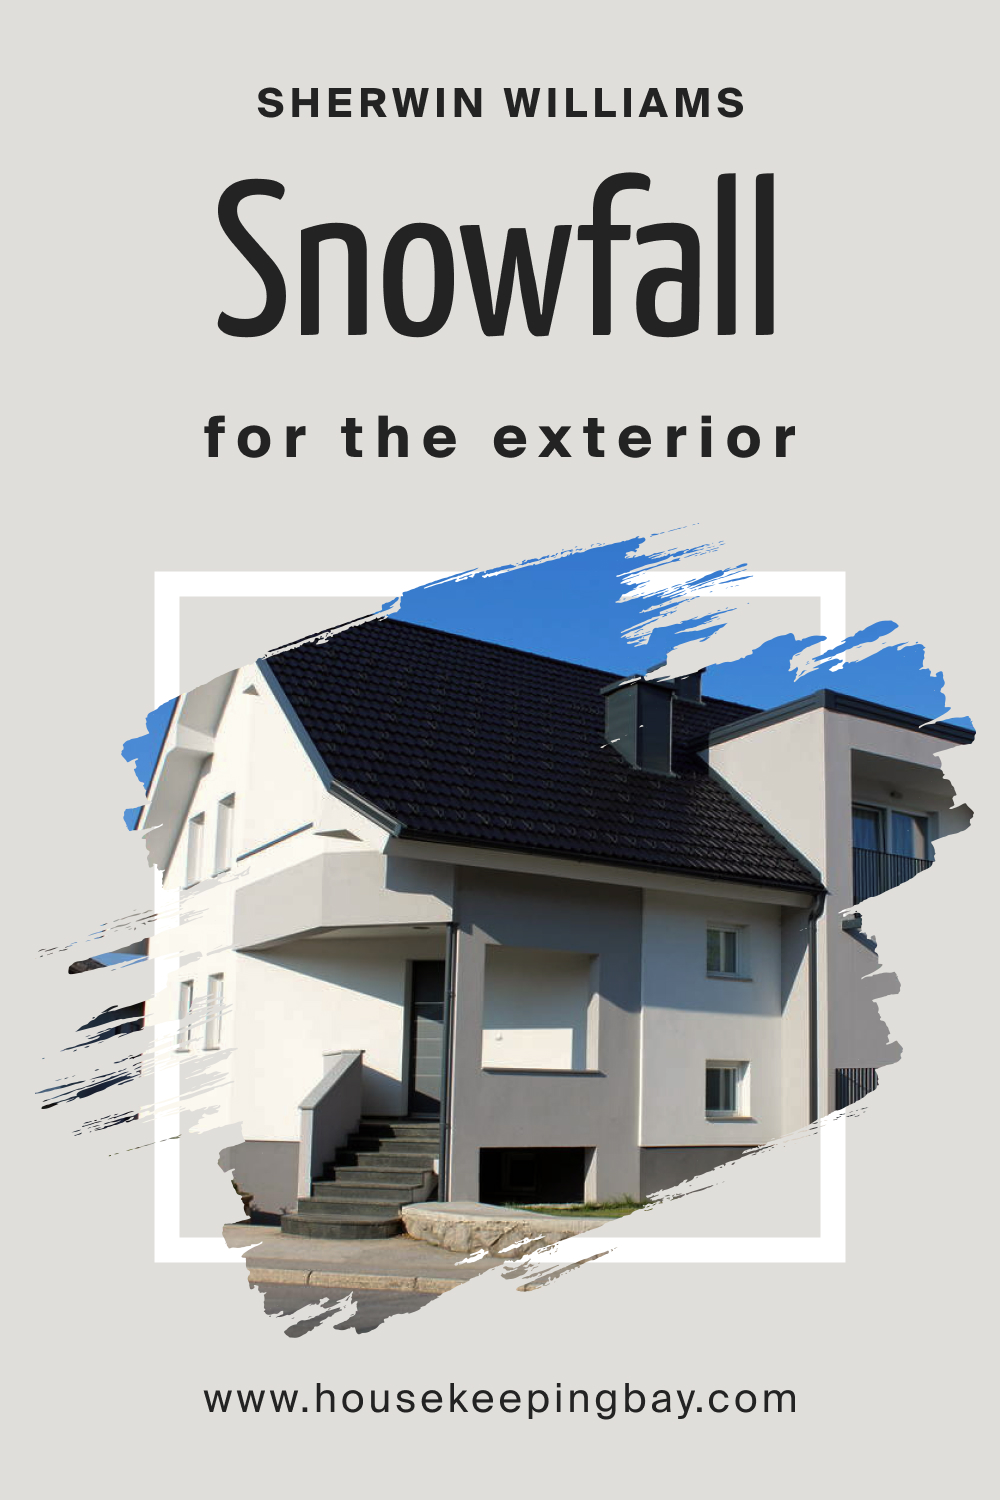 Sherwin Williams. Snowfall For the exterior